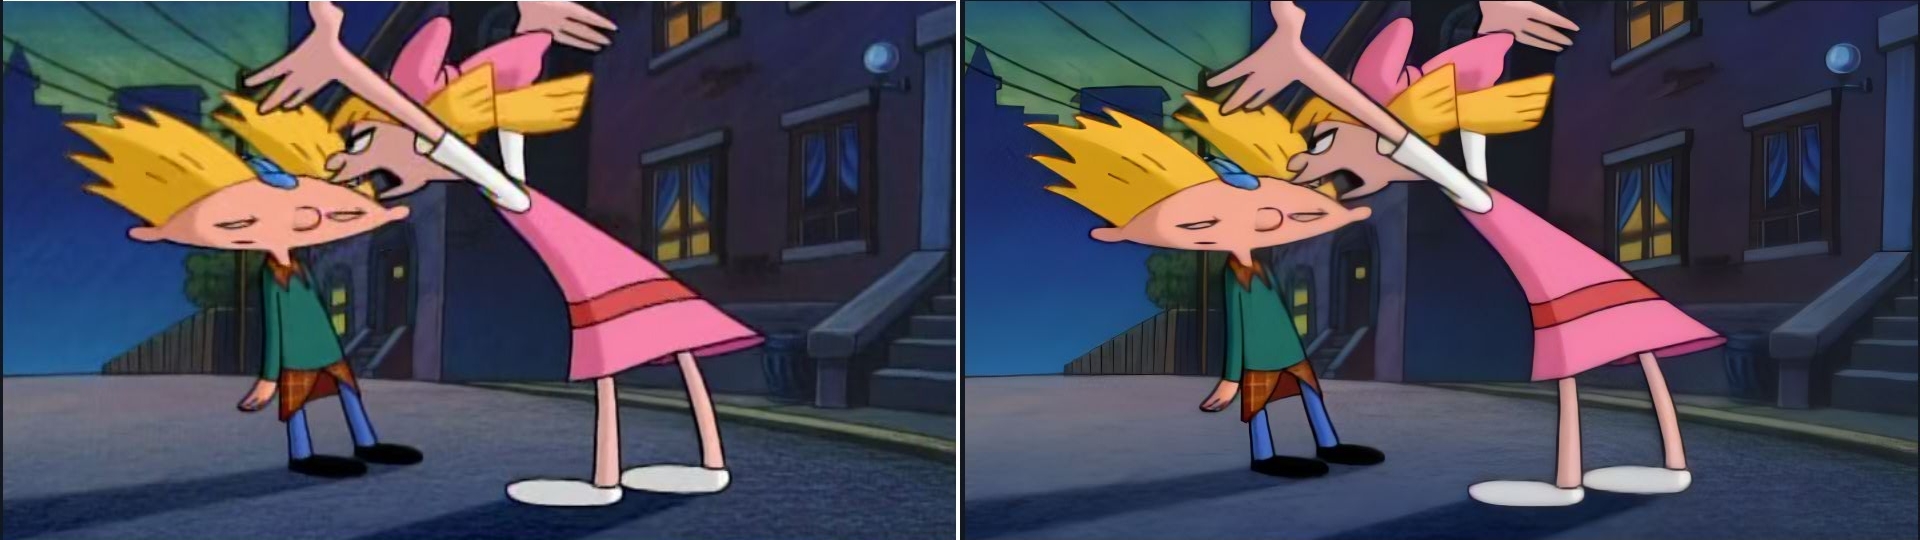 Hey Arnold! (HD Remaster) Season 1. Episode 1a: Strawberries and Bananas Enter the City Center - My, Cartoons, Animated series, Hey, Arnold, Video, Humor, Nostalgia, Upscale, Video VK